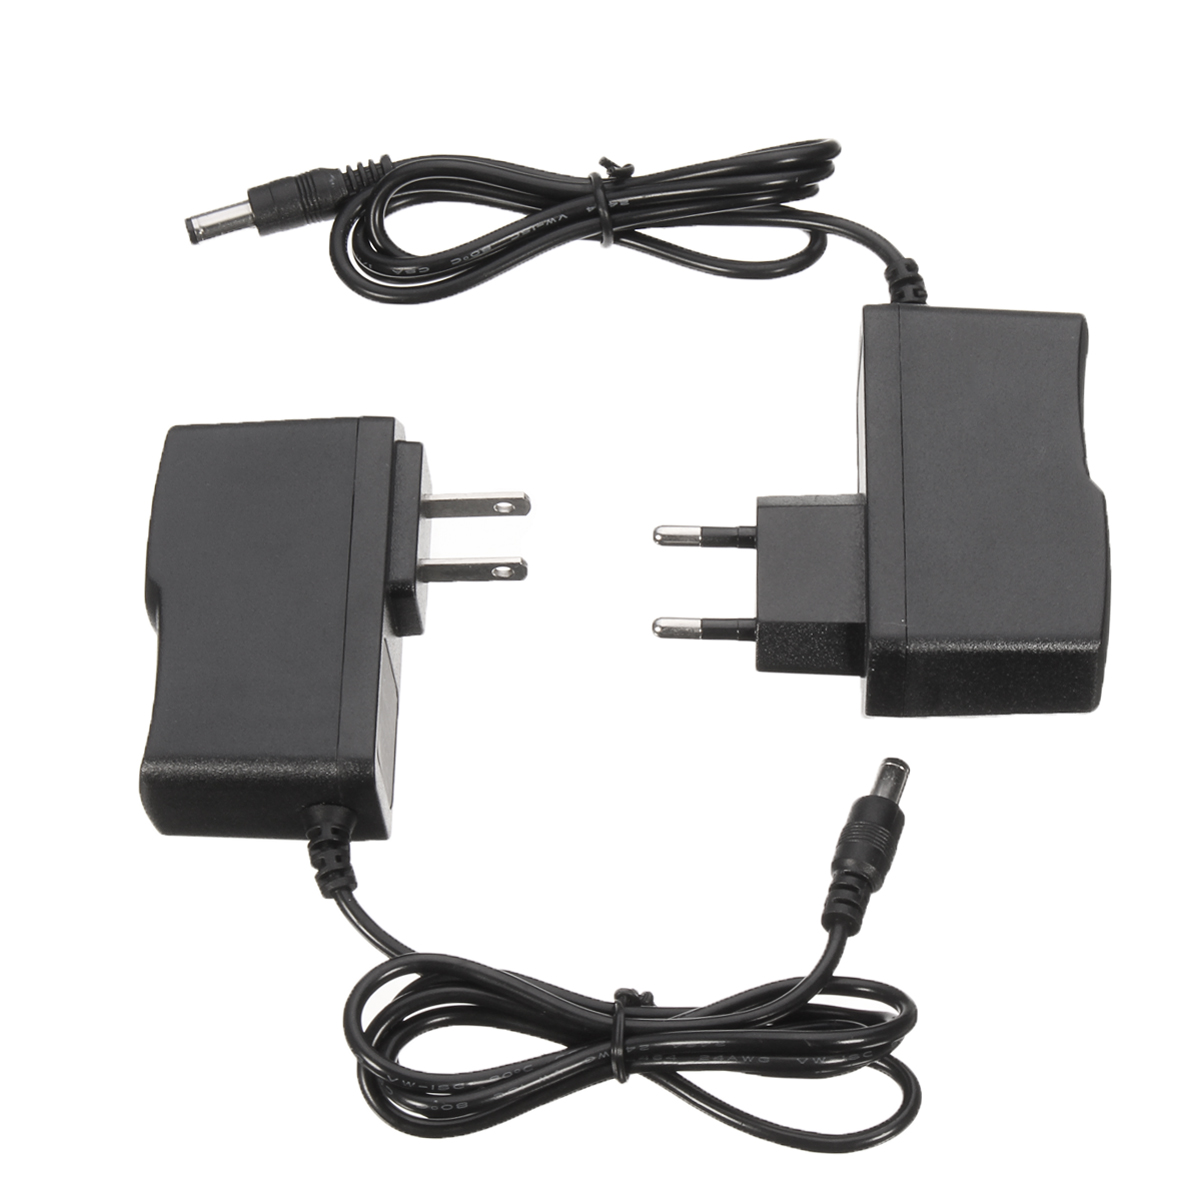 110-240V-USEU-Power-Supply-Charger-Adapter-Charger-For-Electric-Fruit-Potato-Vegetable-Skin-Peeler-1244288-3